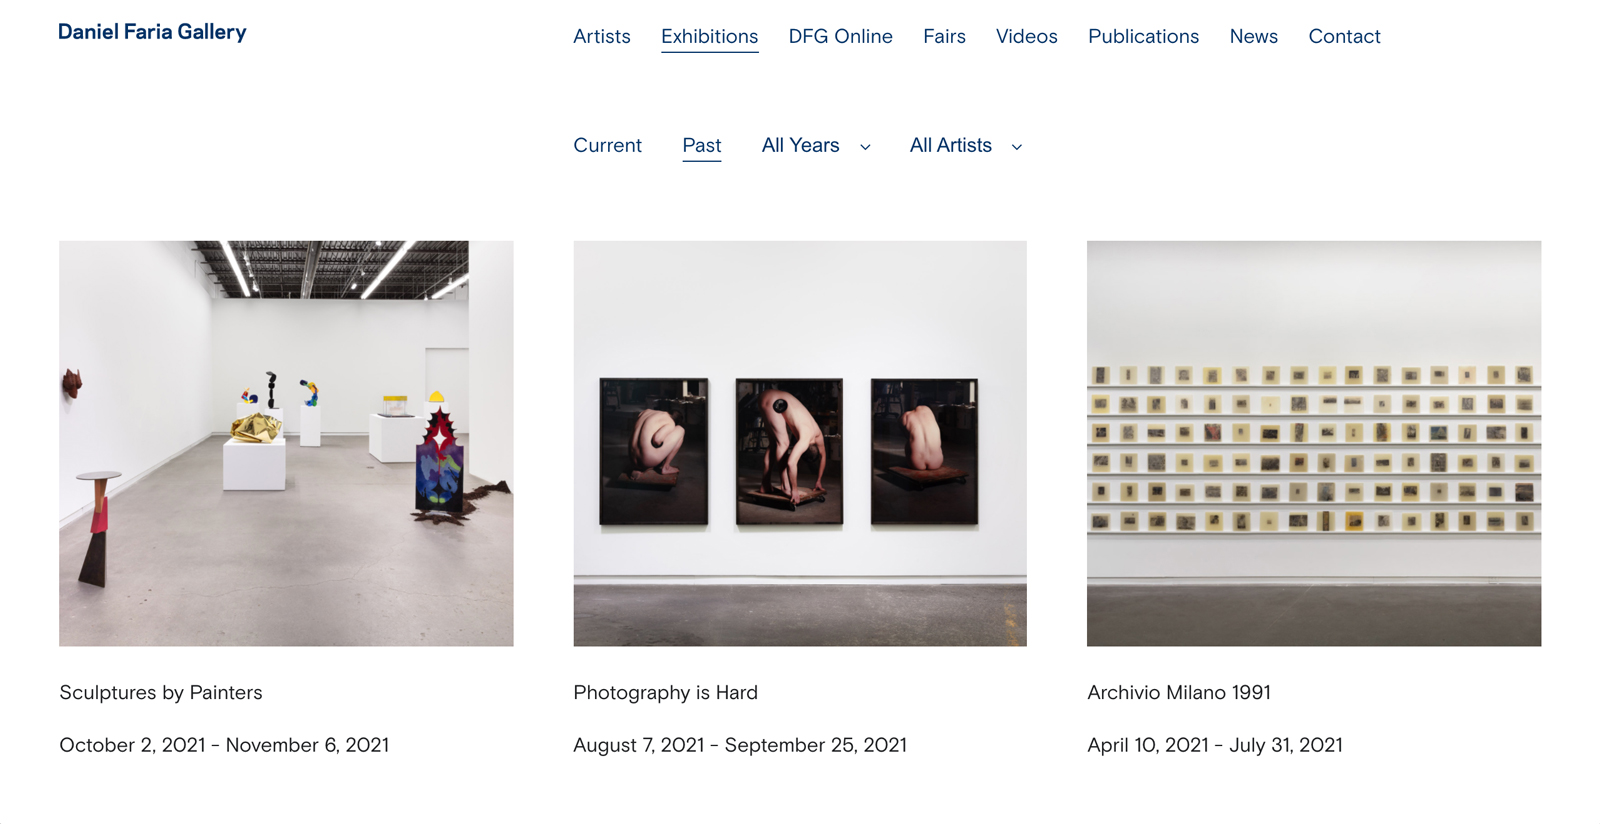 Exhibition page showing all the exhibitions in 3 columns with the ability to sort by year and artist.